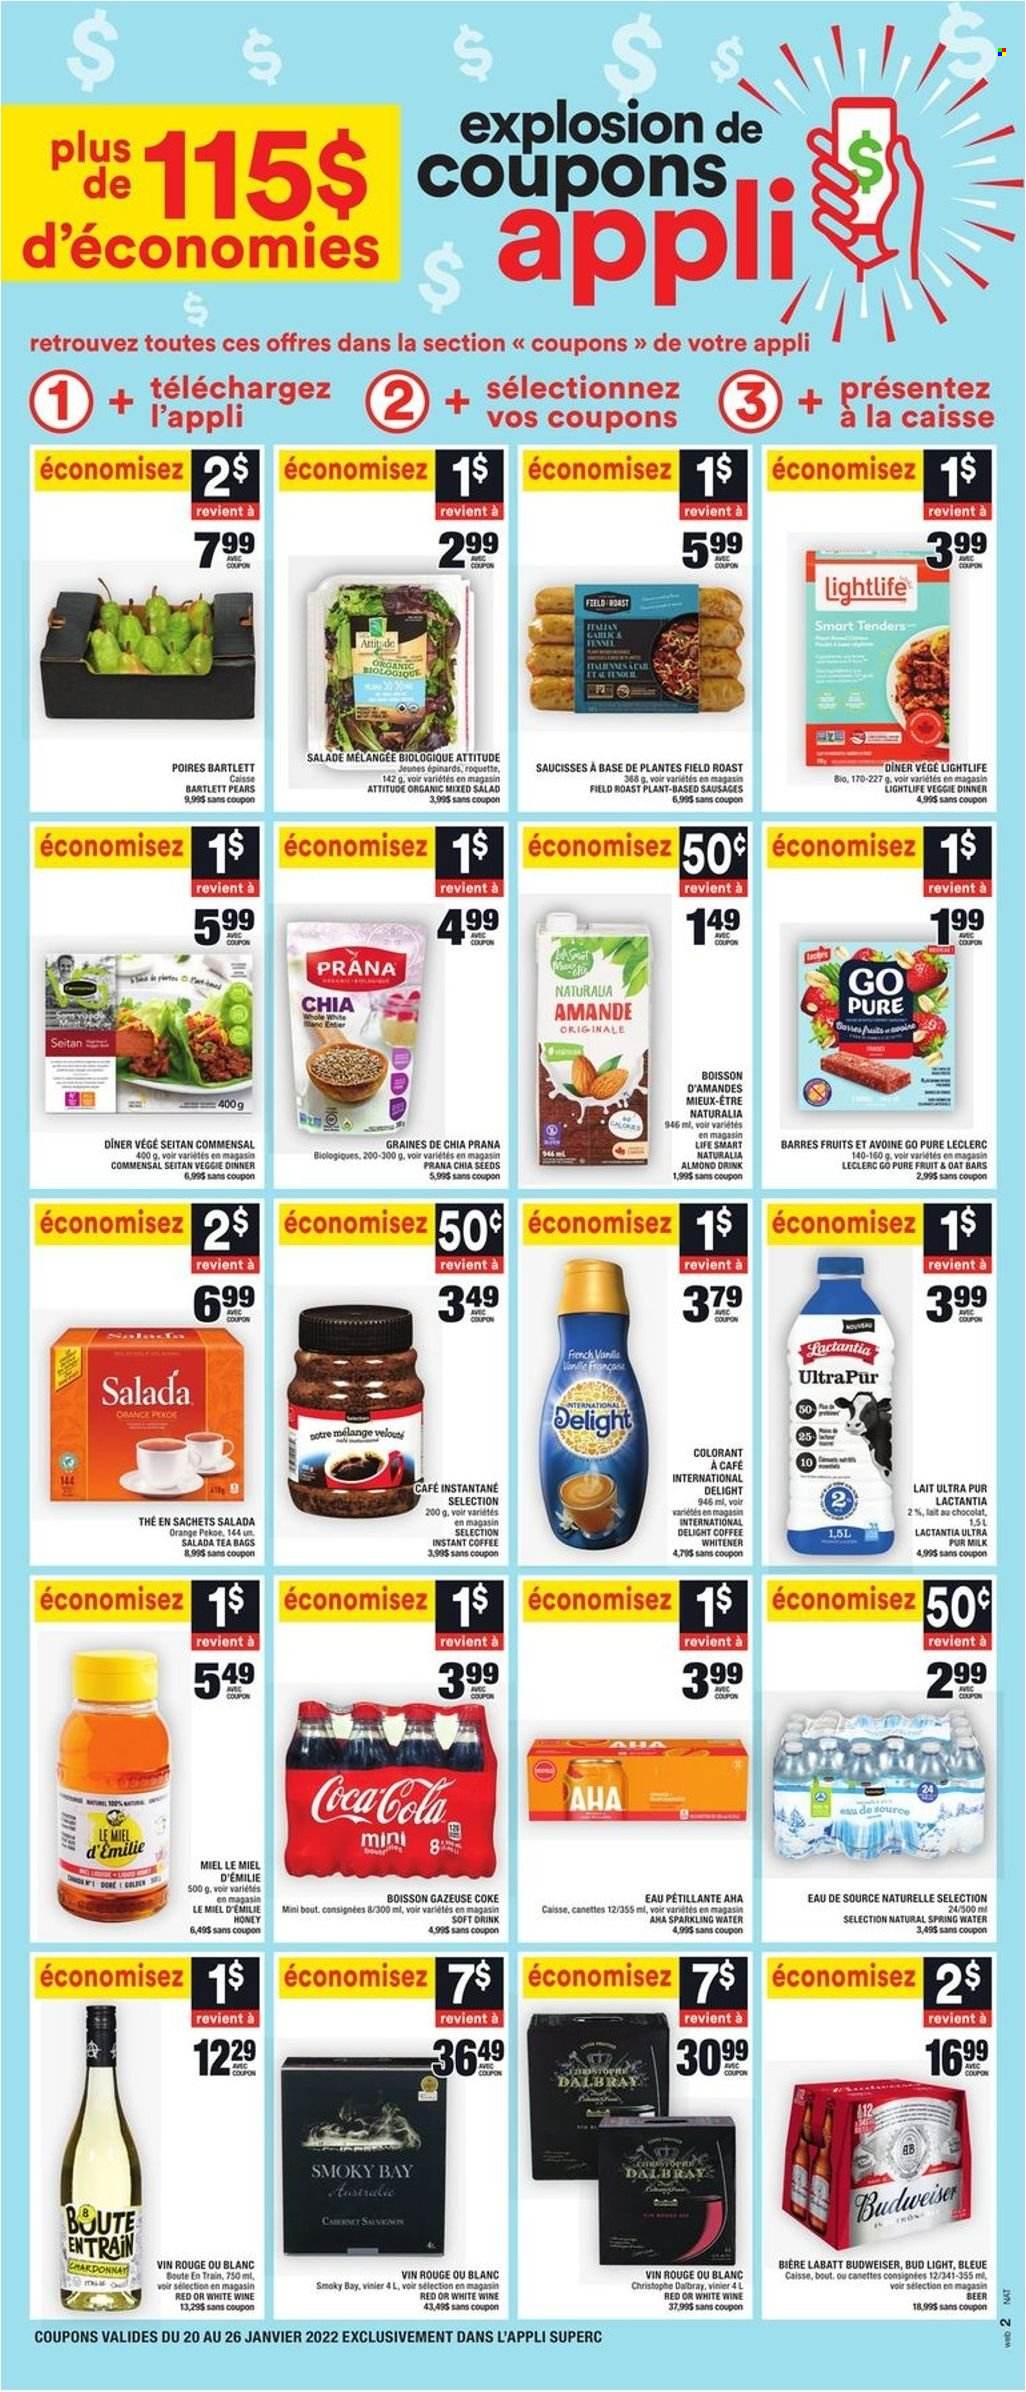 thumbnail - Super C Flyer - January 20, 2022 - January 26, 2022 - Sales products - salad, Bartlett pears, pears, sausage, milk, chia seeds, honey, Coca-Cola, soft drink, spring water, sparkling water, tea bags, instant coffee, wine, beer, Bud Light, Budweiser, oranges. Page 10.